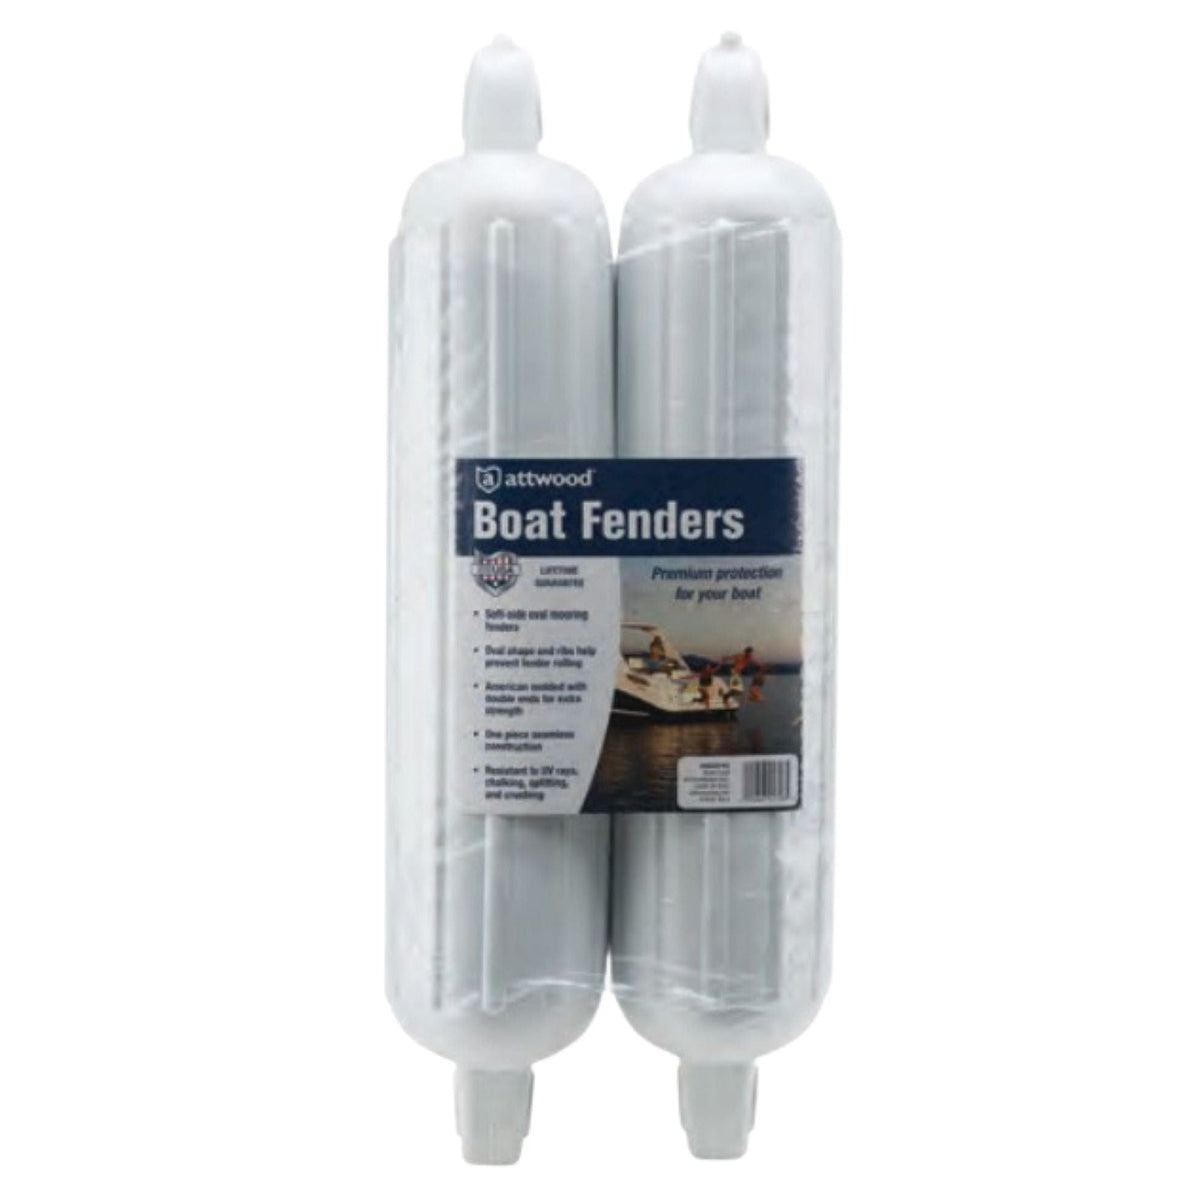 Attwood Marine Qualifies for Free Shipping Attwood Marine Fender 5" 2-pk #93552P2